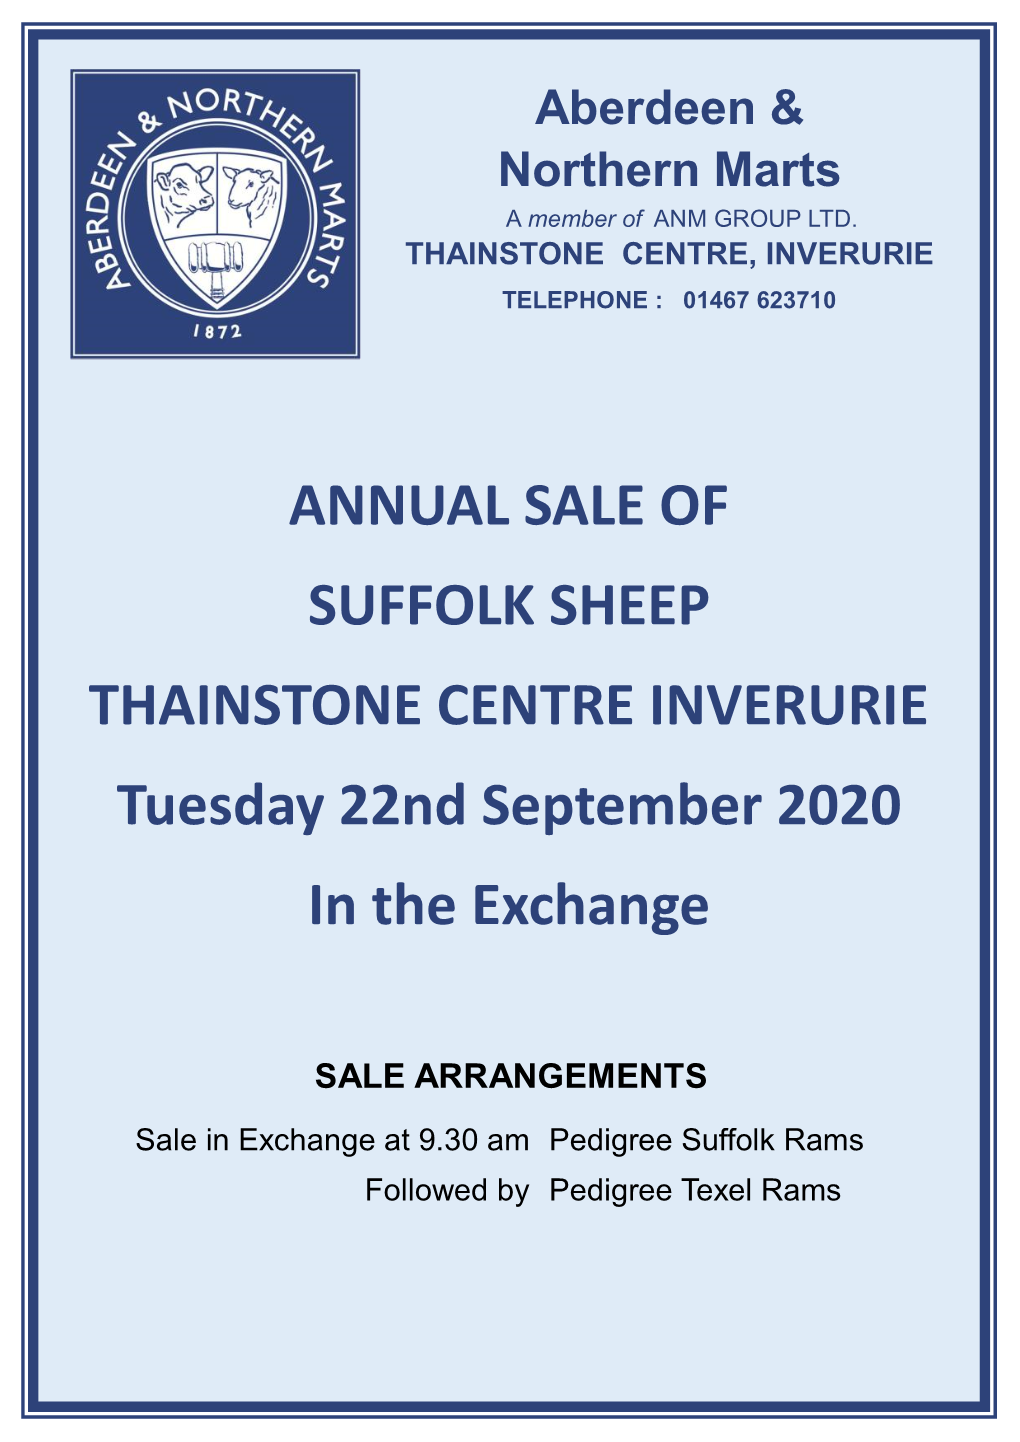 ANNUAL SALE of SUFFOLK SHEEP THAINSTONE CENTRE INVERURIE Tuesday 22Nd September 2020 in the Exchange